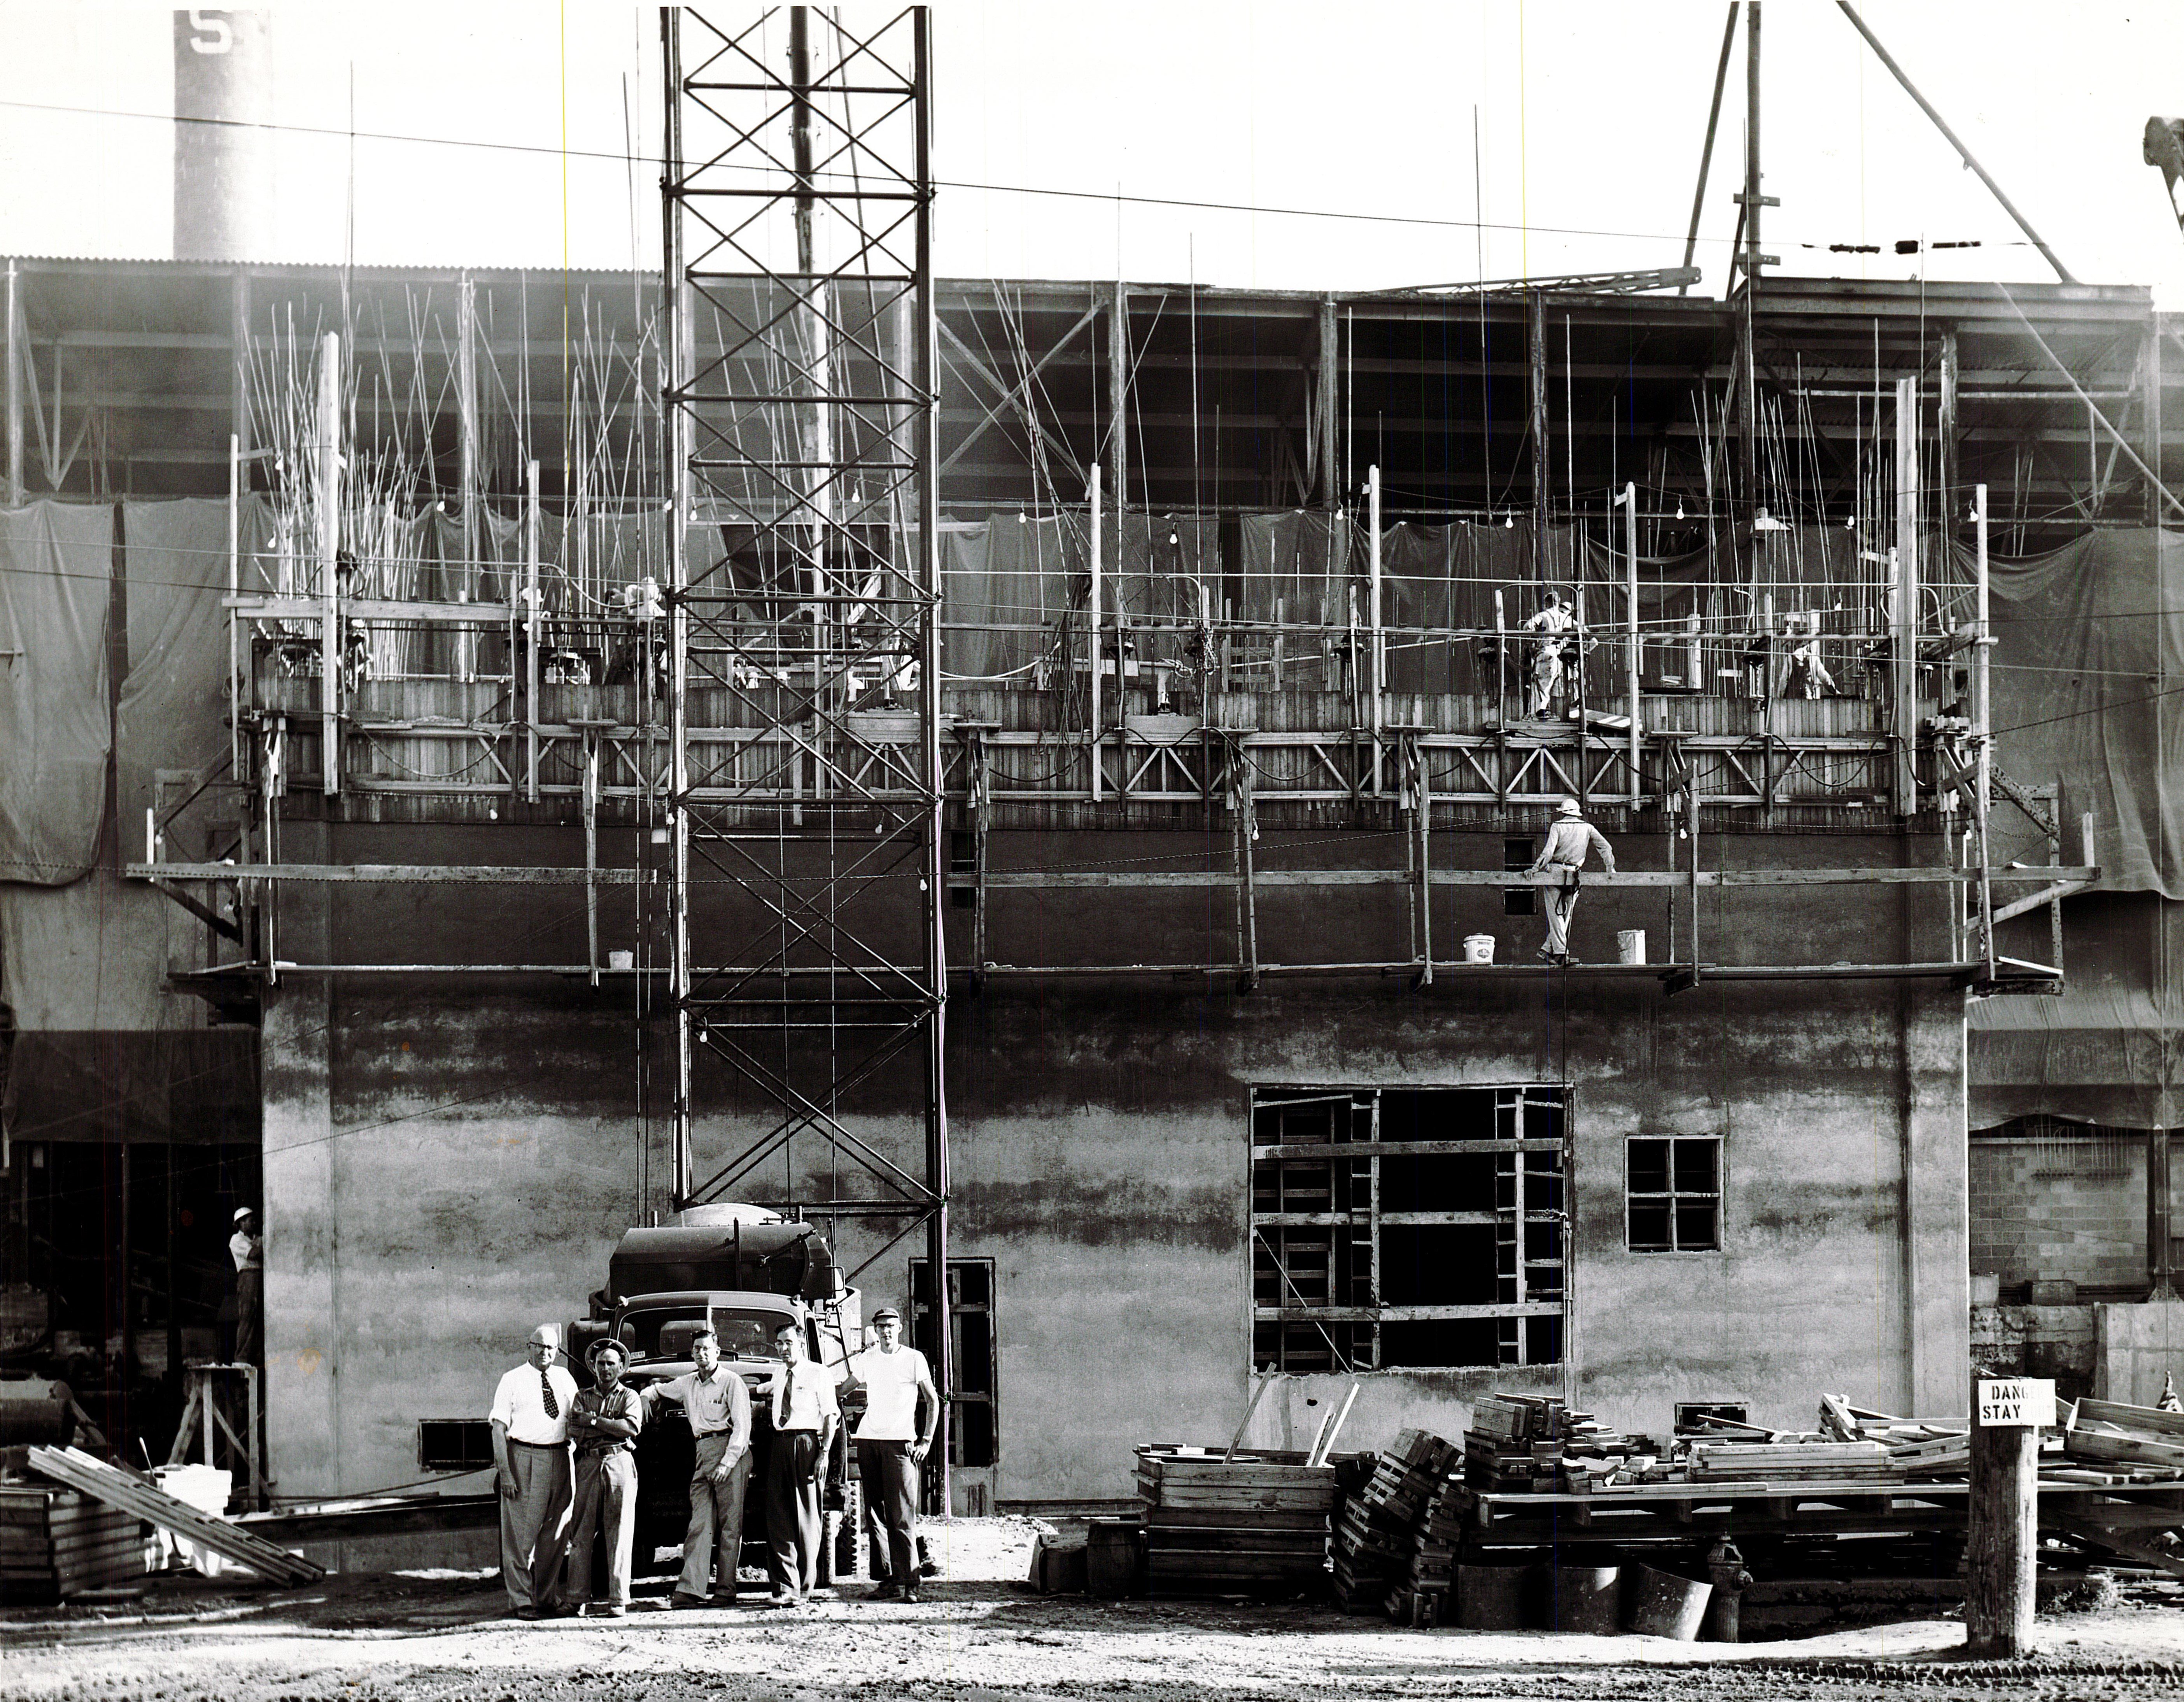 John Klug, pictured far left, overseeing the slipform construction of a new Klug batch house. 1954